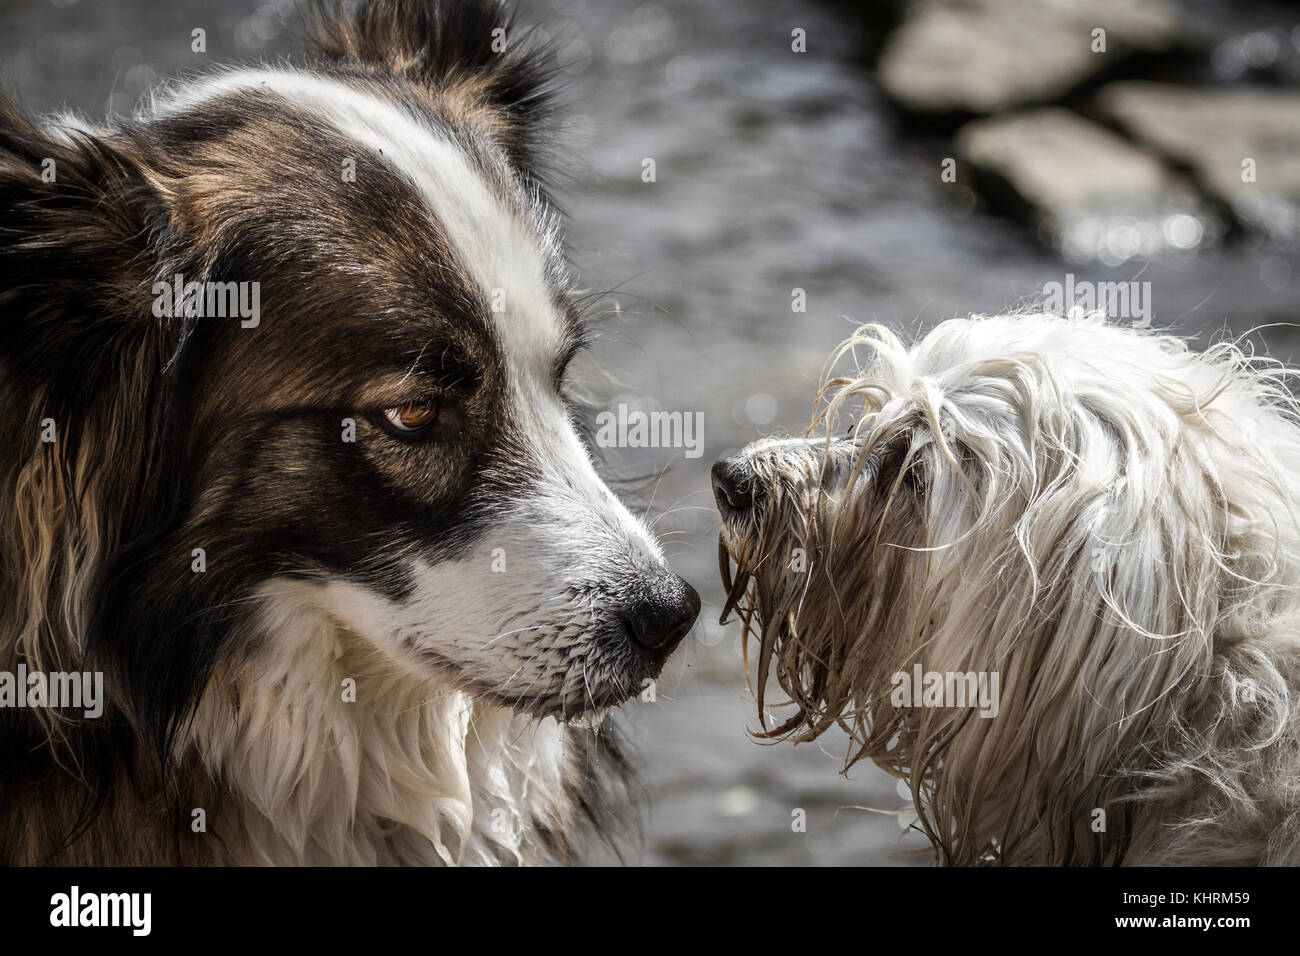 A mongrel dog and a Havanese dog will clarify who and when and where should the water. Man can see the tension of the situation on the attitude of the Stock Photo